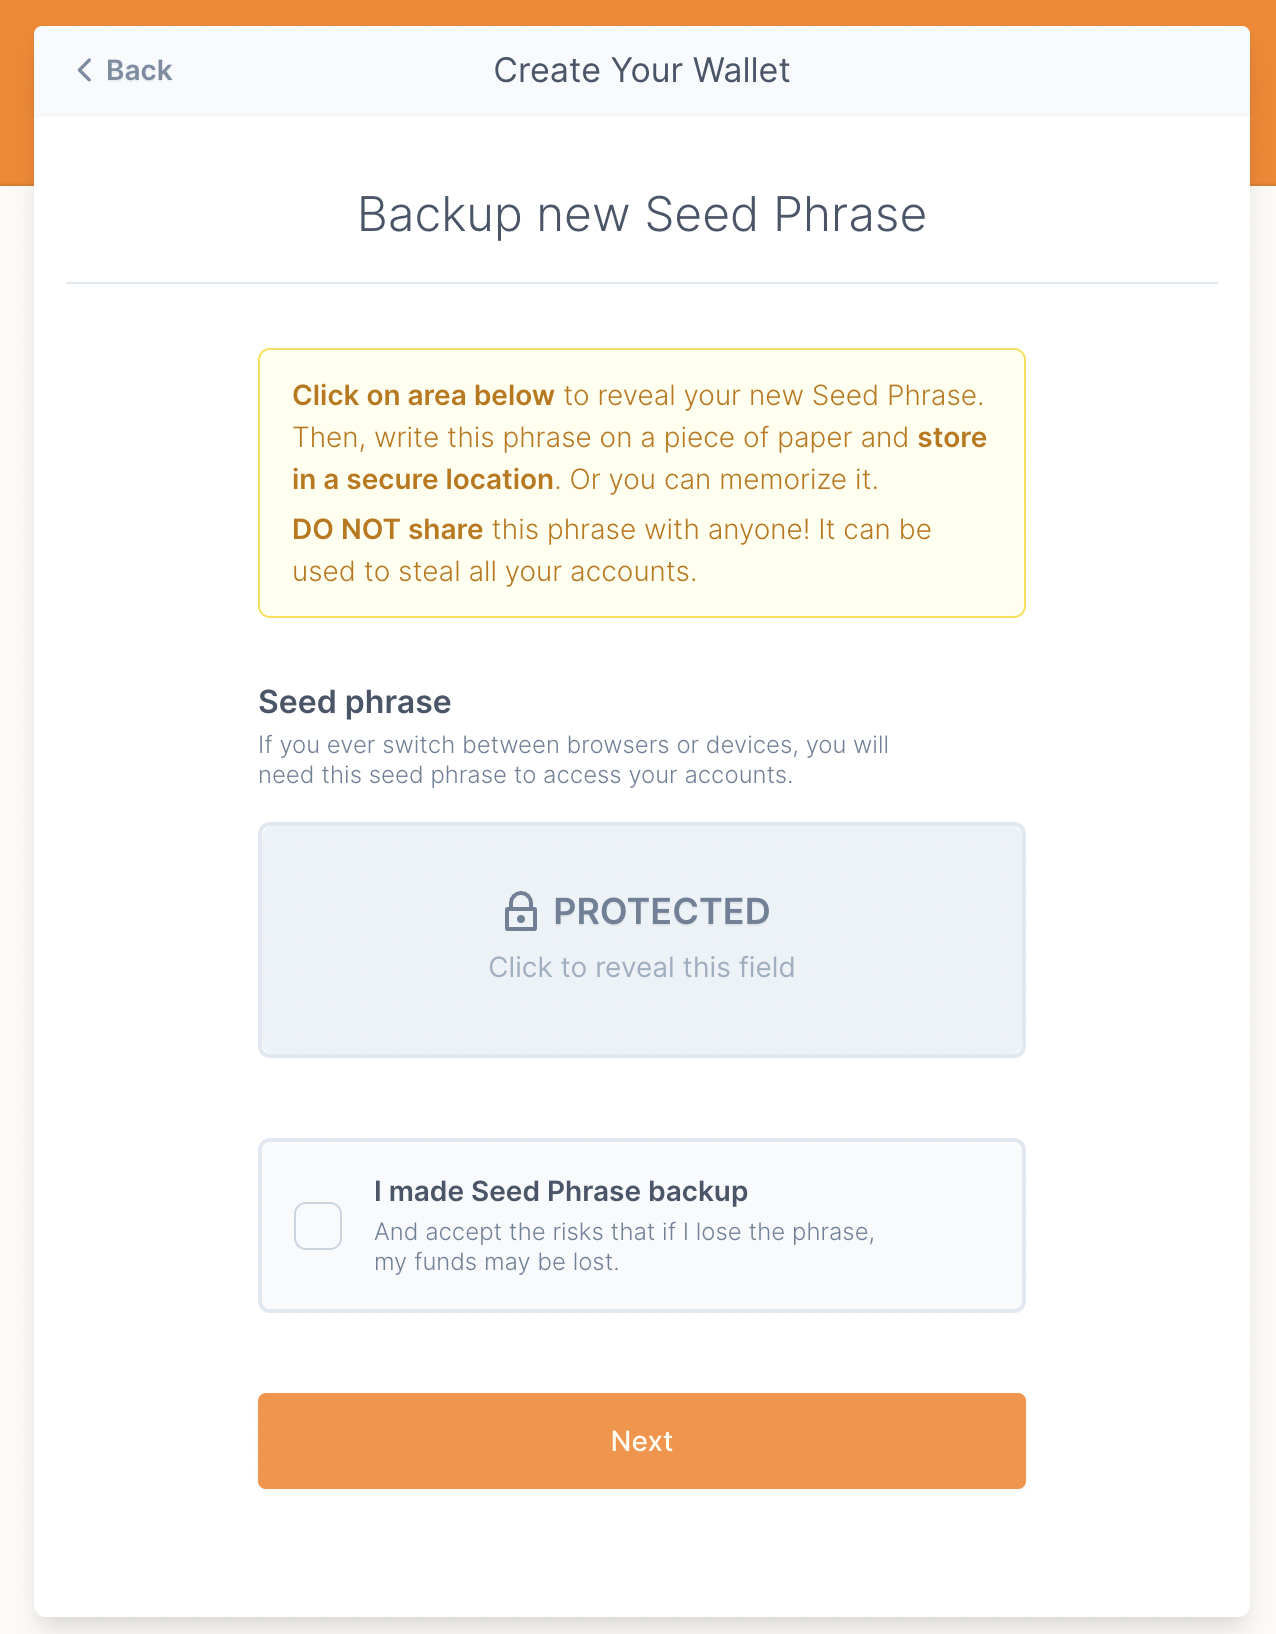 Make sure to complete this step carefully and store your seed phrase in a secure location - ideally somewhere offline as well.